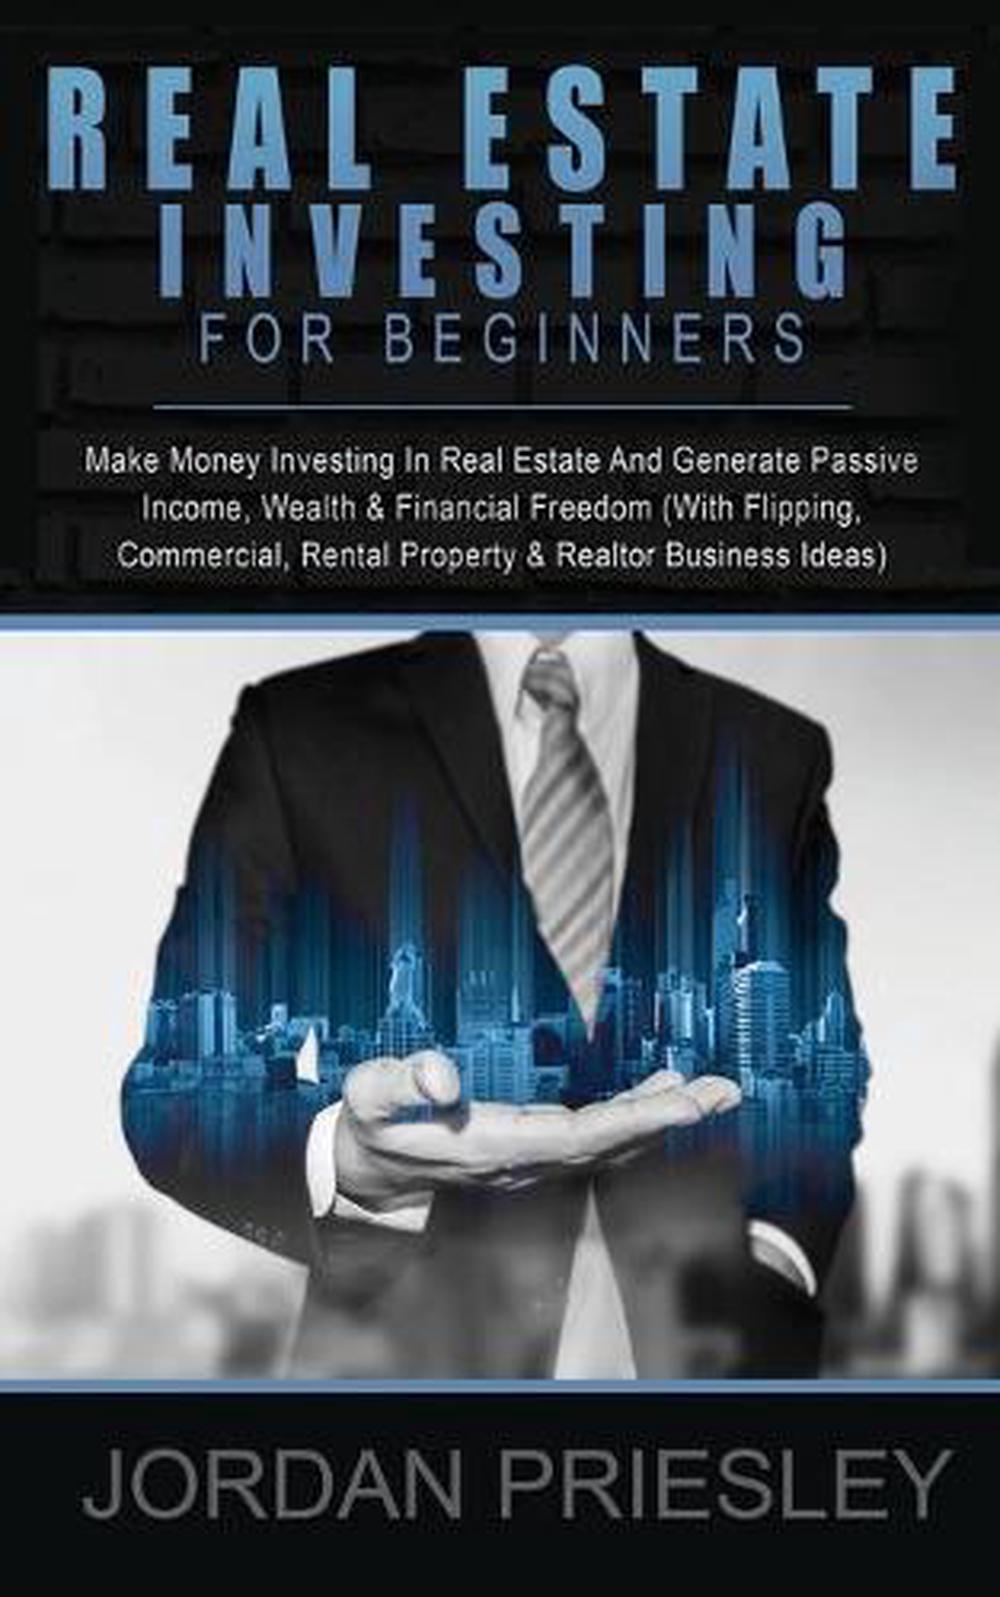 investing for beginners book